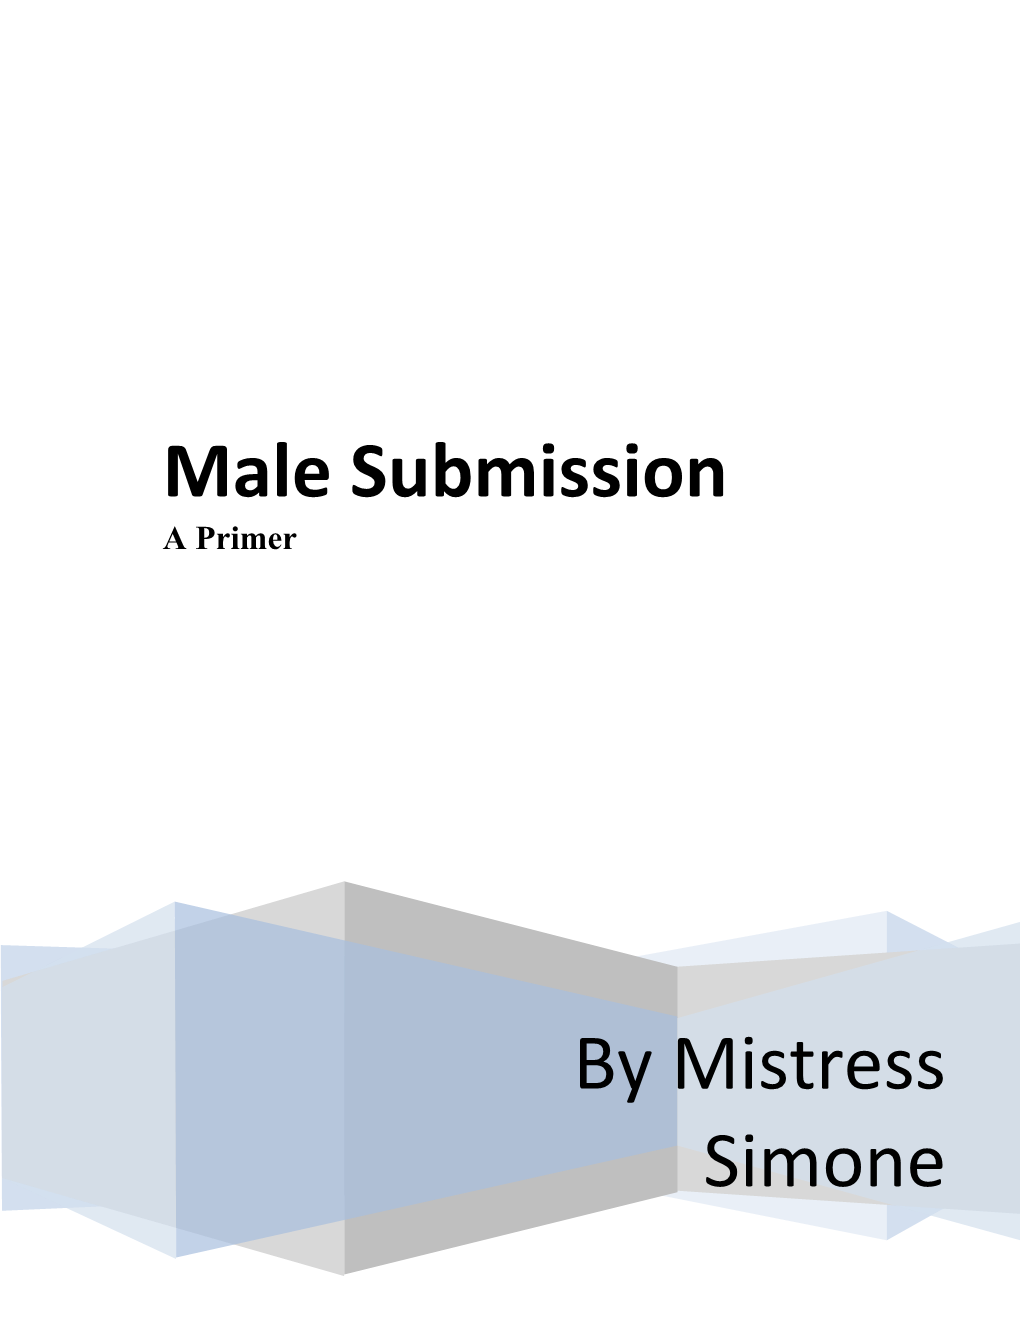 Primer on Male Submission